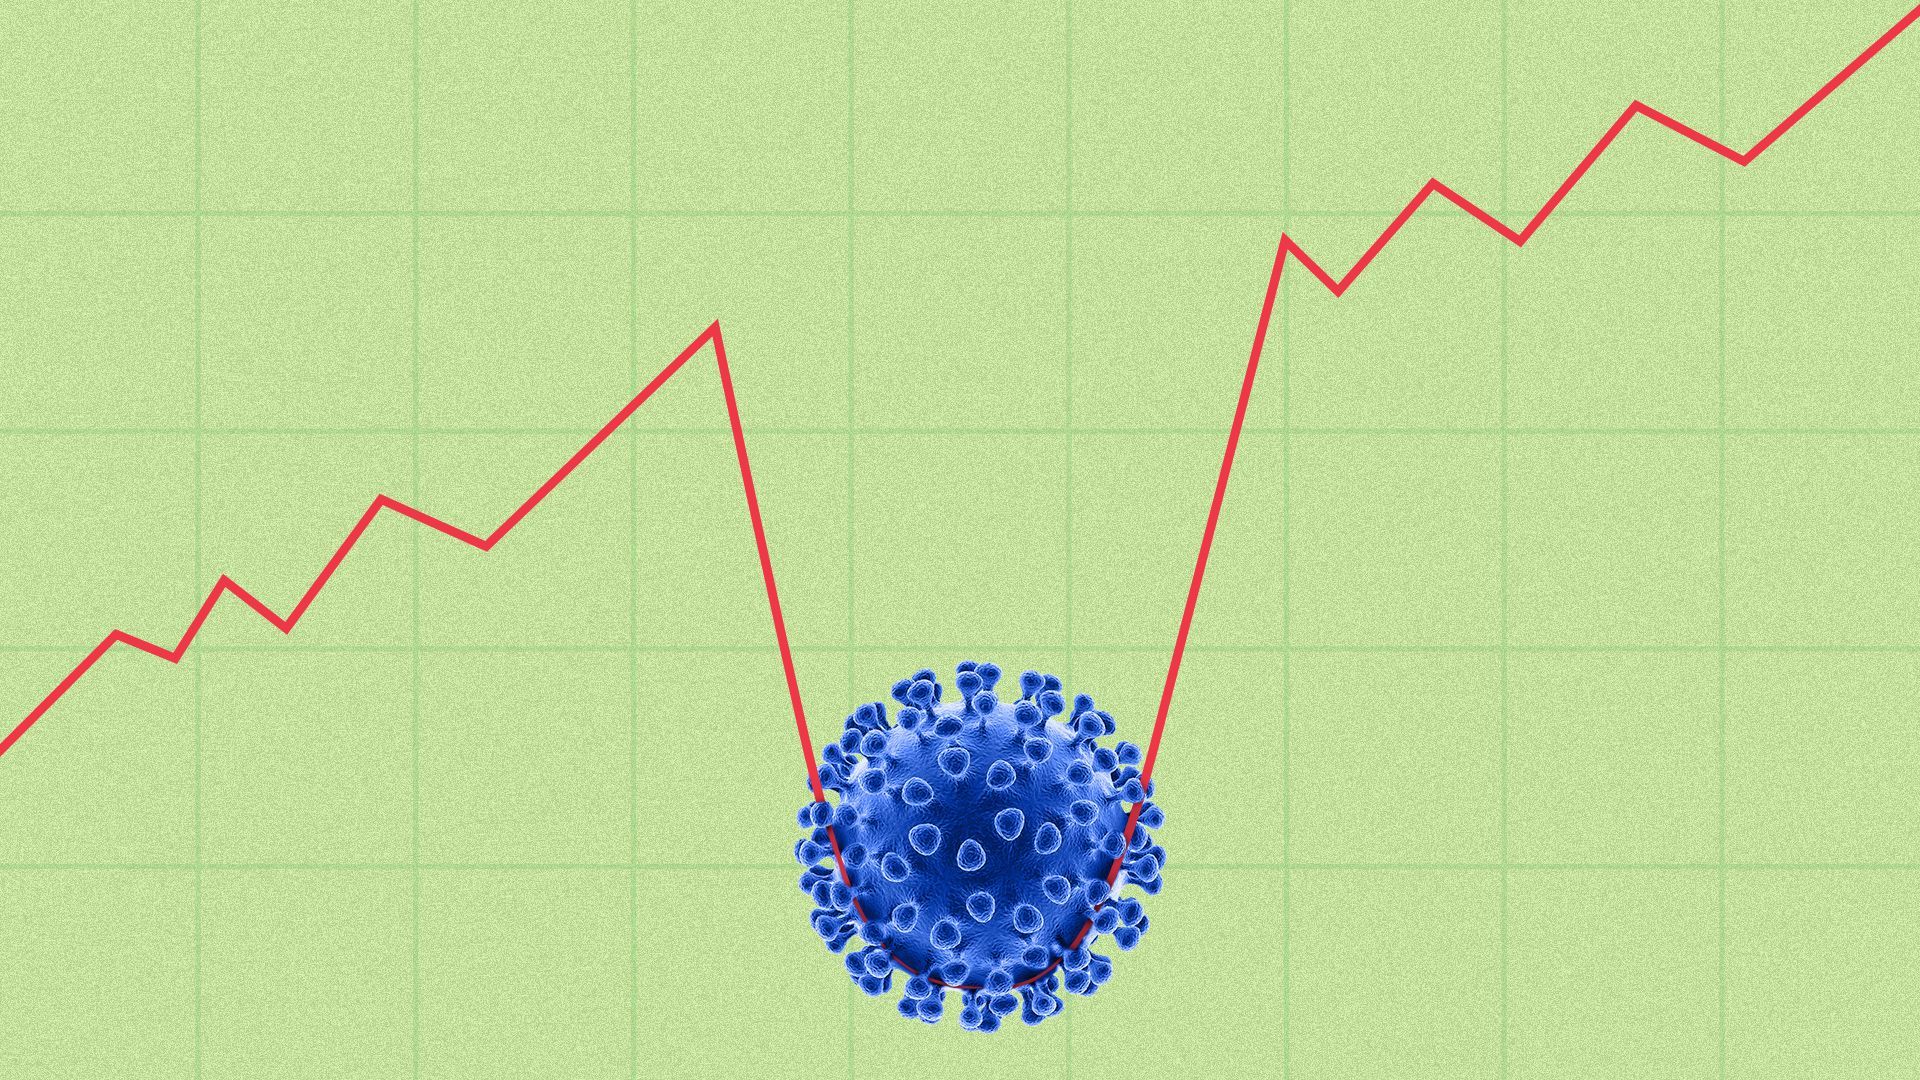 Illustration of a virus cell landing on an upward trending line and weighing it down.  